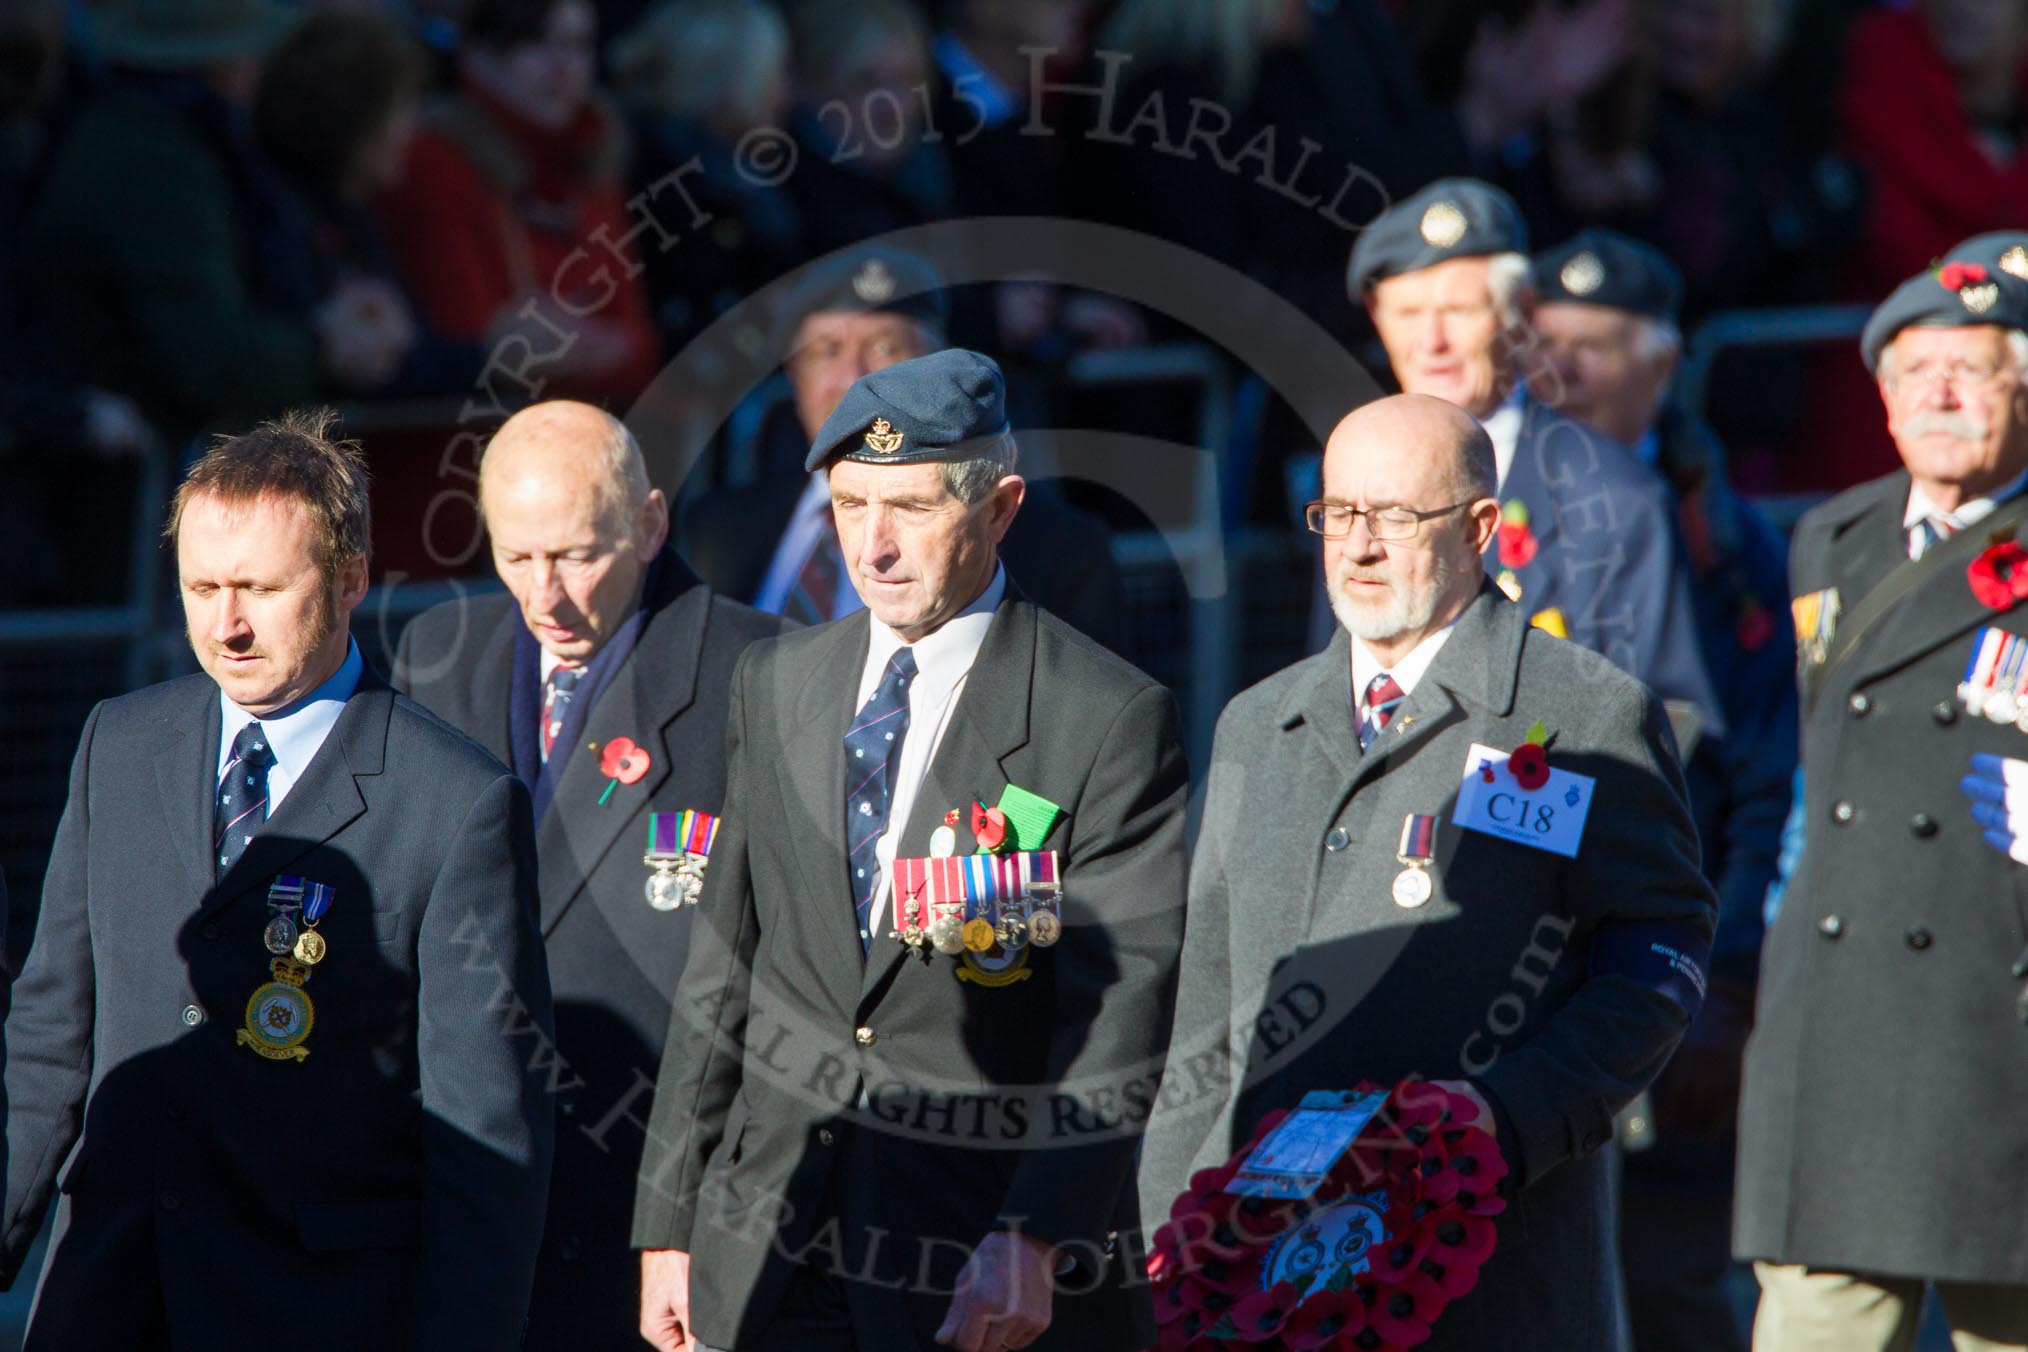 Remembrance Sunday Cenotaph March Past 2013: C18 - Royal Air Force Butterworth & Penang Association..
Press stand opposite the Foreign Office building, Whitehall, London SW1,
London,
Greater London,
United Kingdom,
on 10 November 2013 at 12:08, image #1816